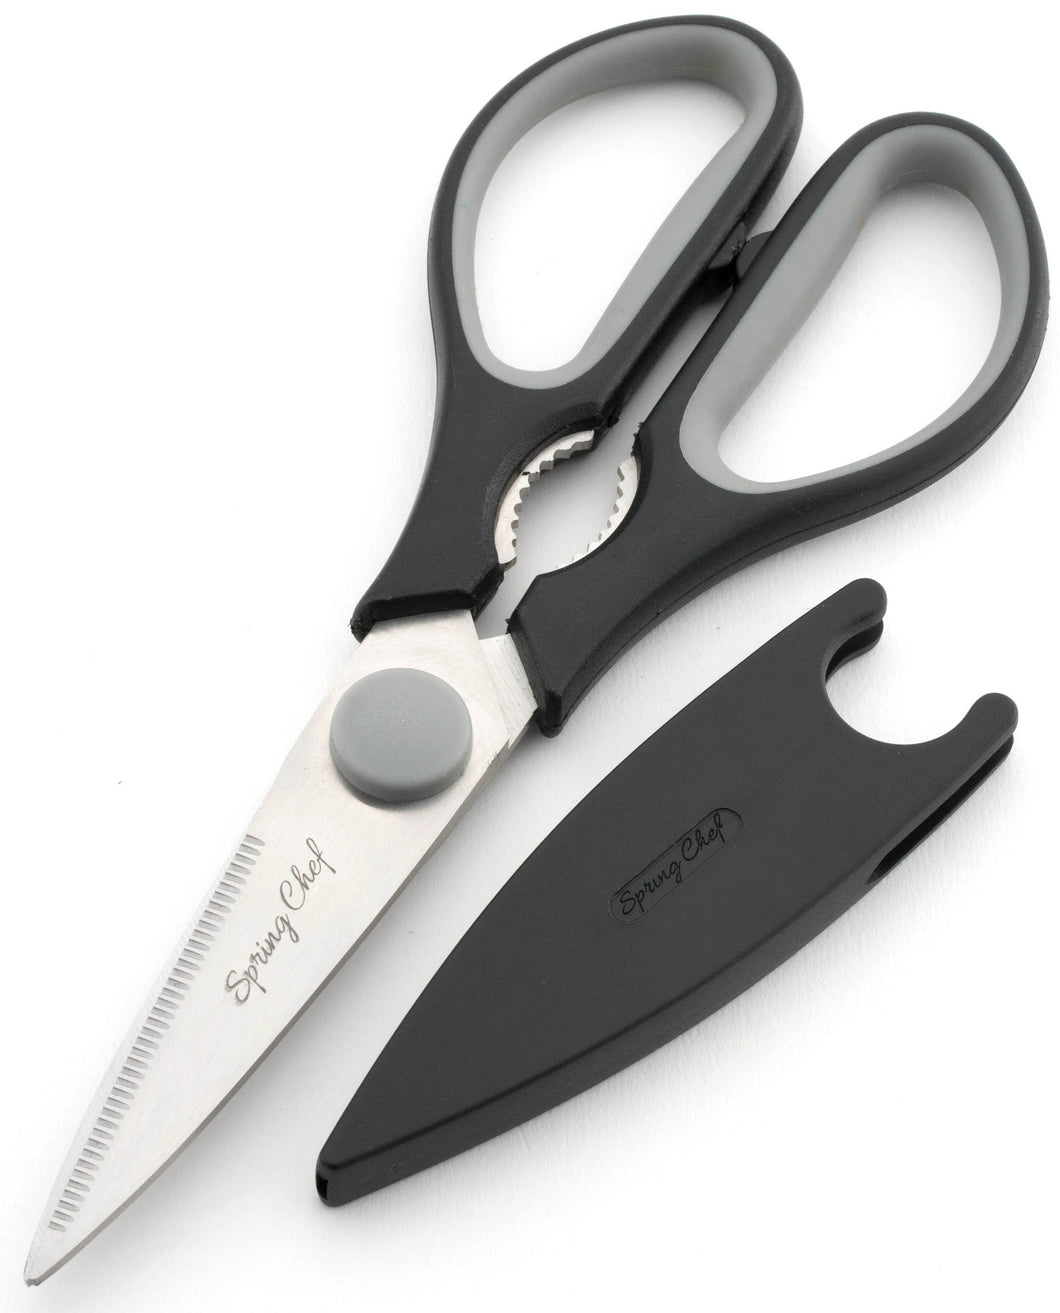 Chef Craft 21000 Kitchen Shears, Stainless Steel Blade, Plastic